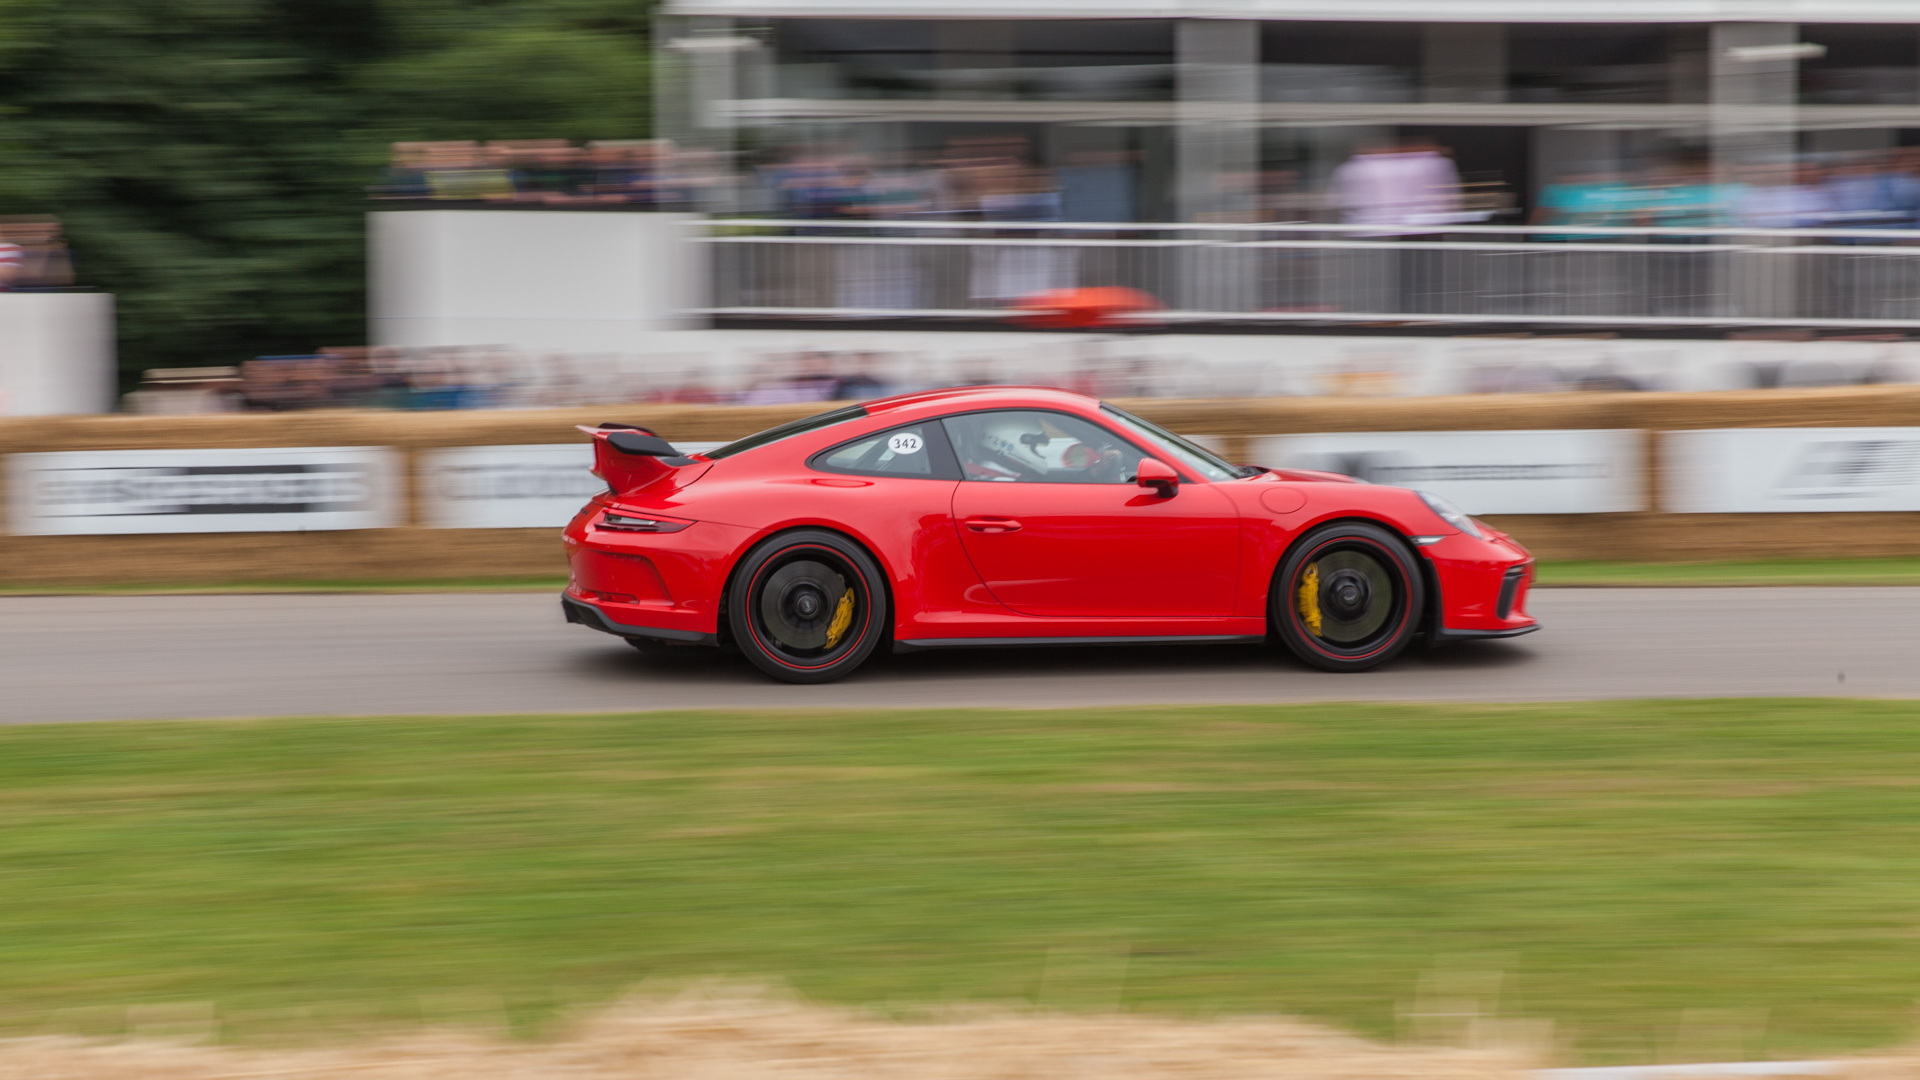 2017 Goodwood Festival of Speed-Day 1